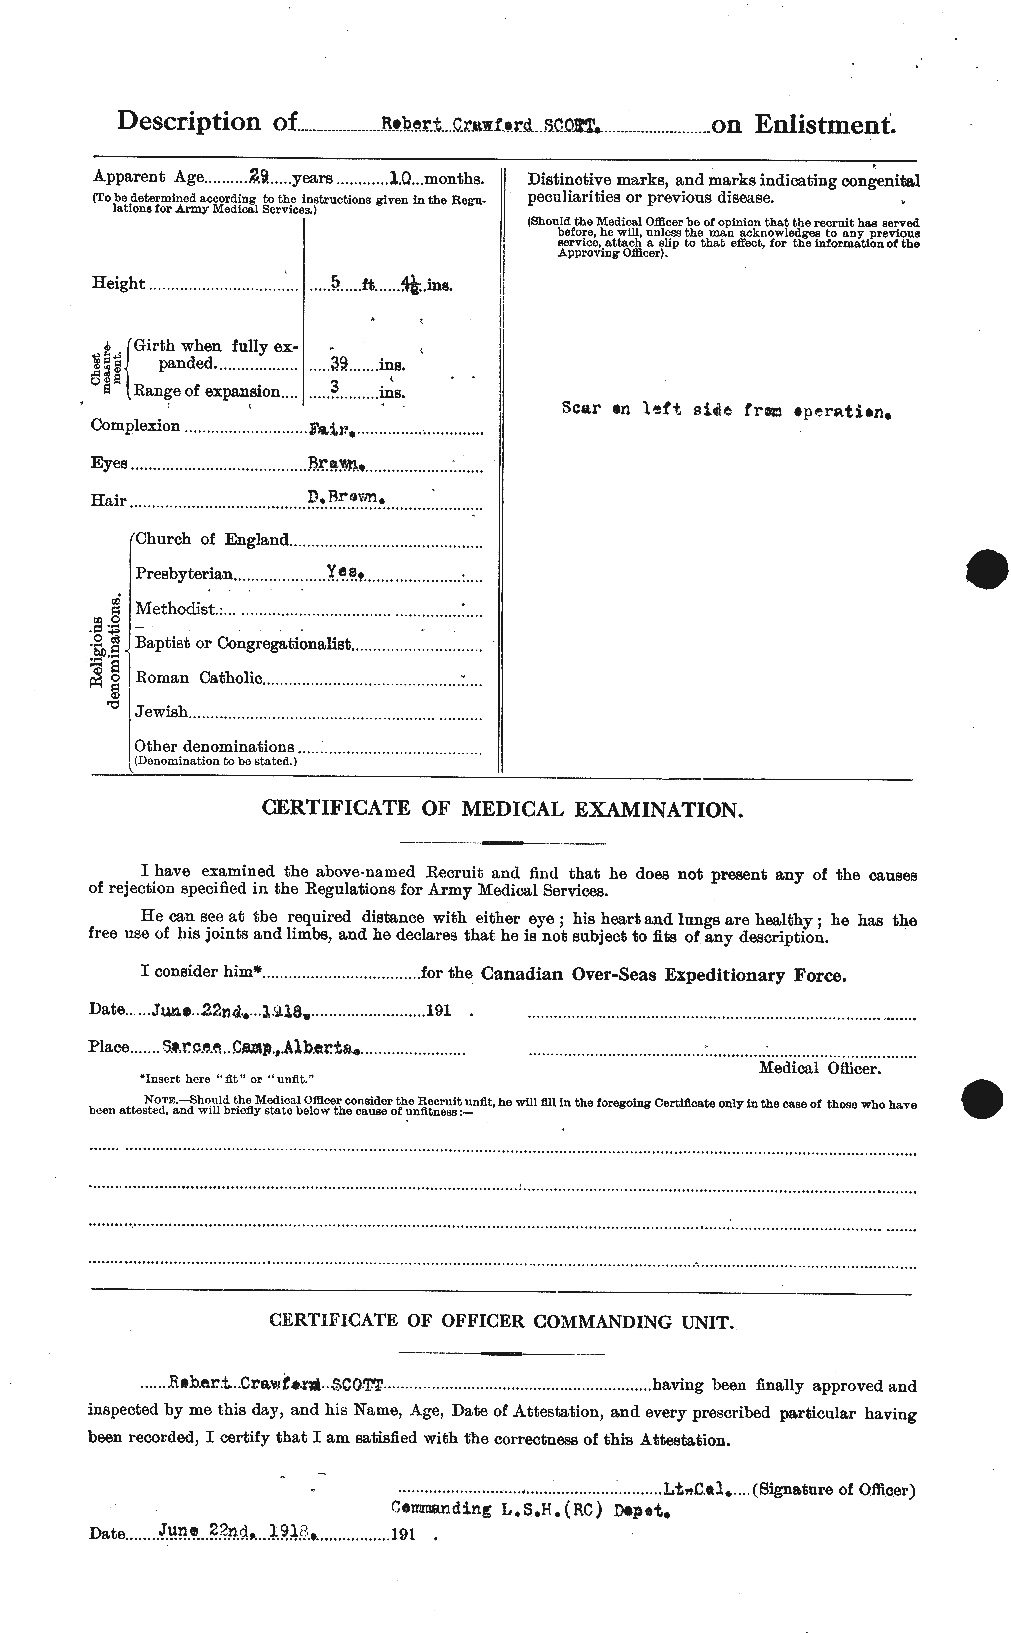 Personnel Records of the First World War - CEF 089153b